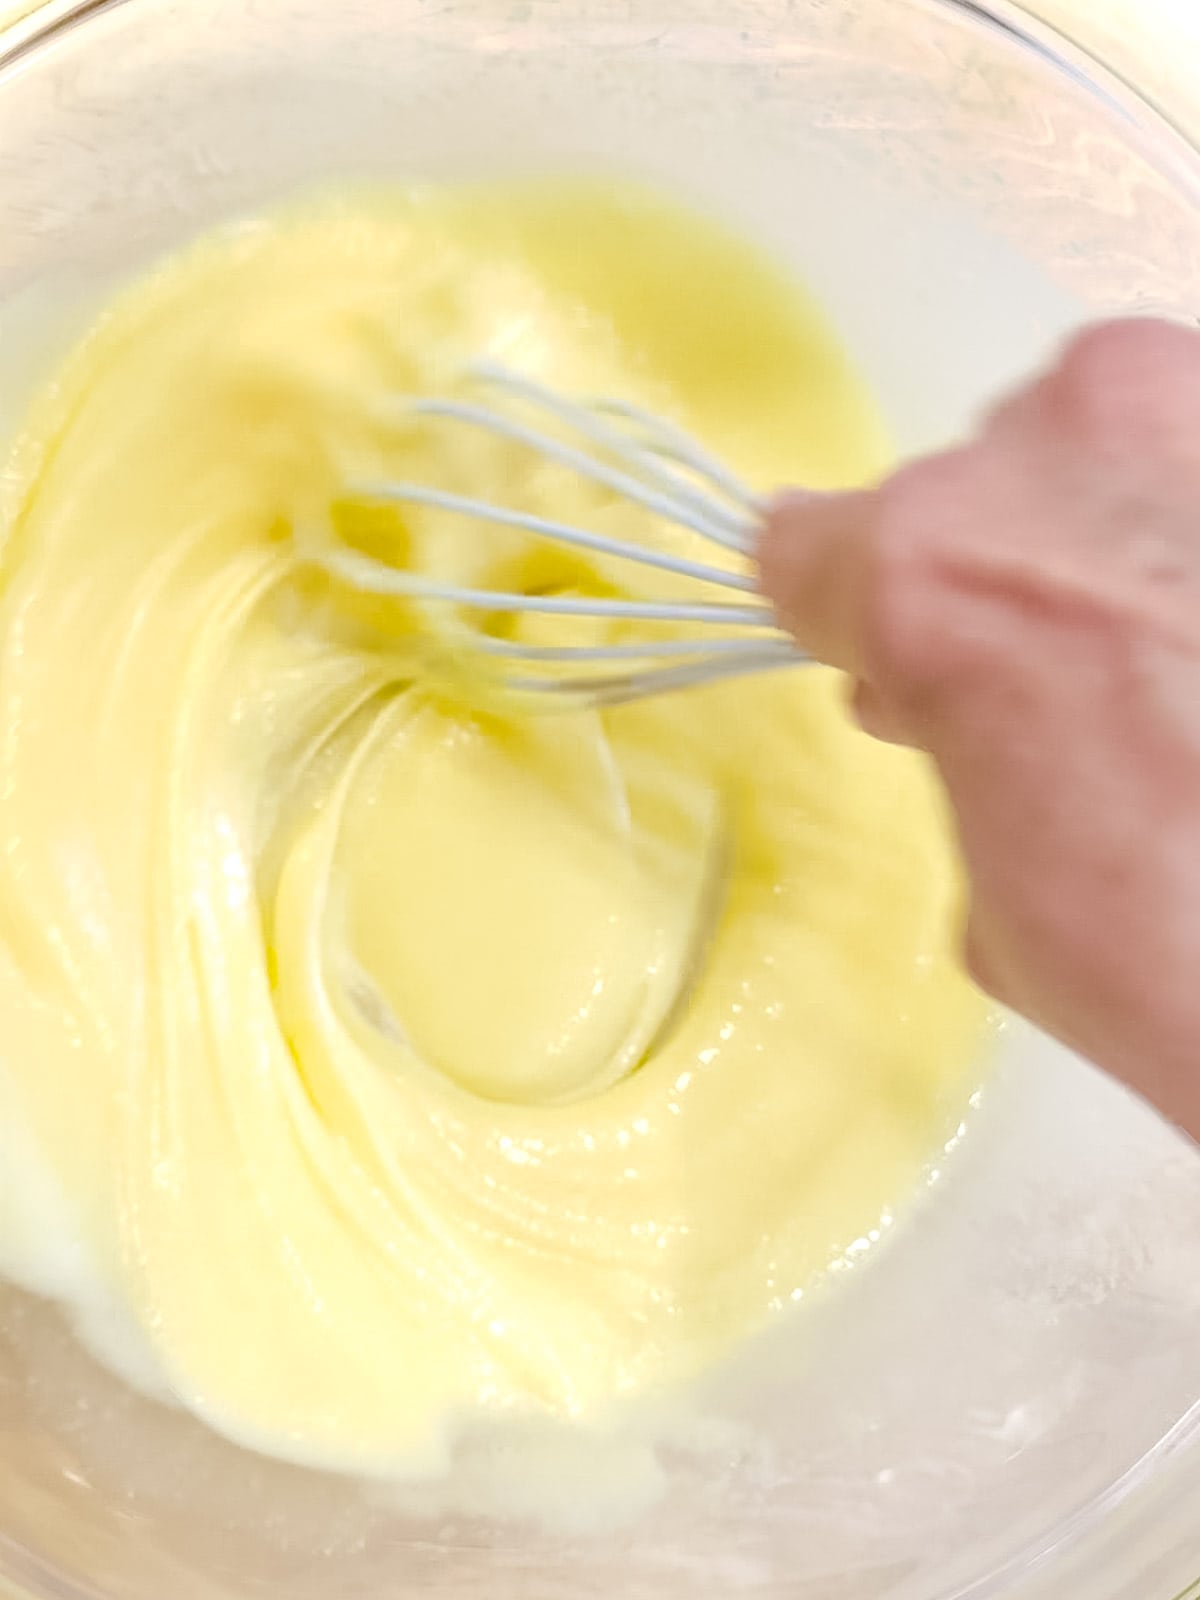 Whisking together eggs, sugar, eggs, and sour cream for muffins.